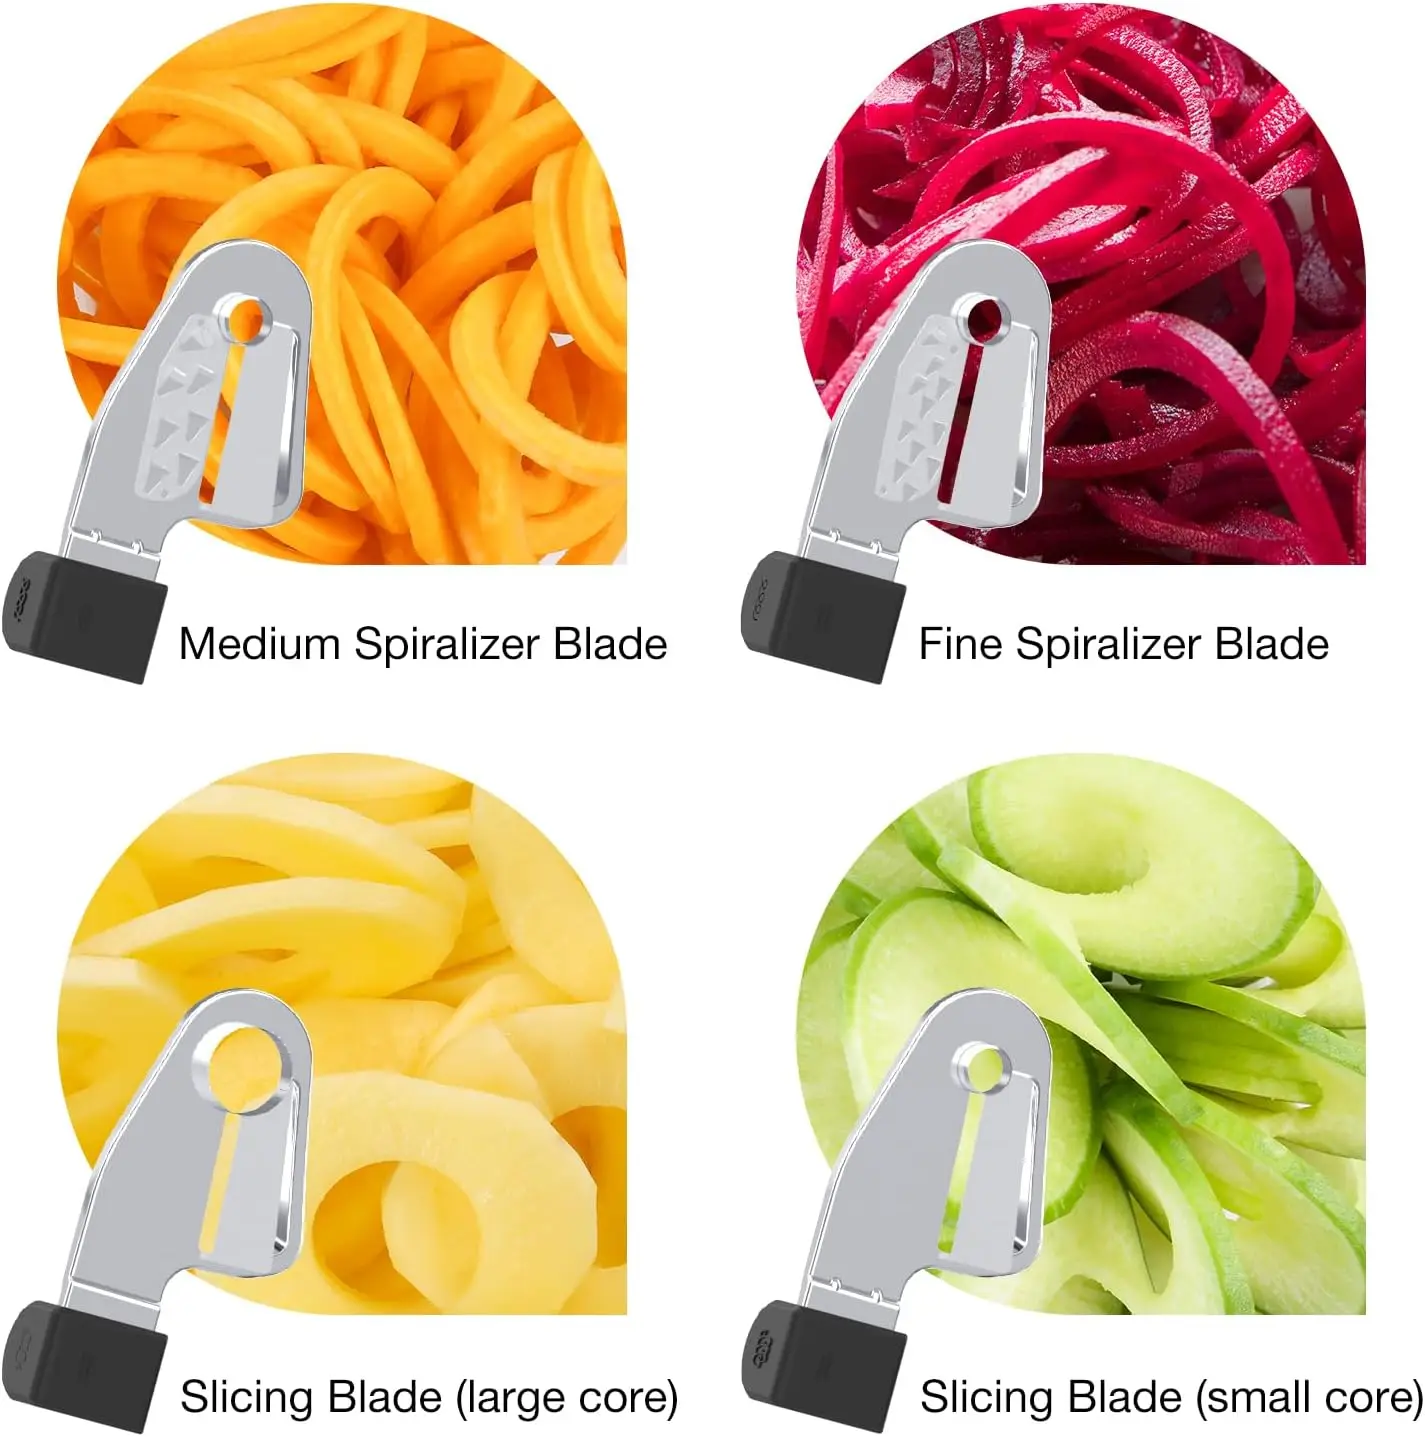 https://ae01.alicdn.com/kf/S82a3bd50f66c42b59cfbb9777f7347few/Spiralizer-Attachment-Compatible-with-KitchenAid-Stand-Mixer-Comes-with-Peel-Core-and-Slice-Not-KitchenAid-Brand.jpg